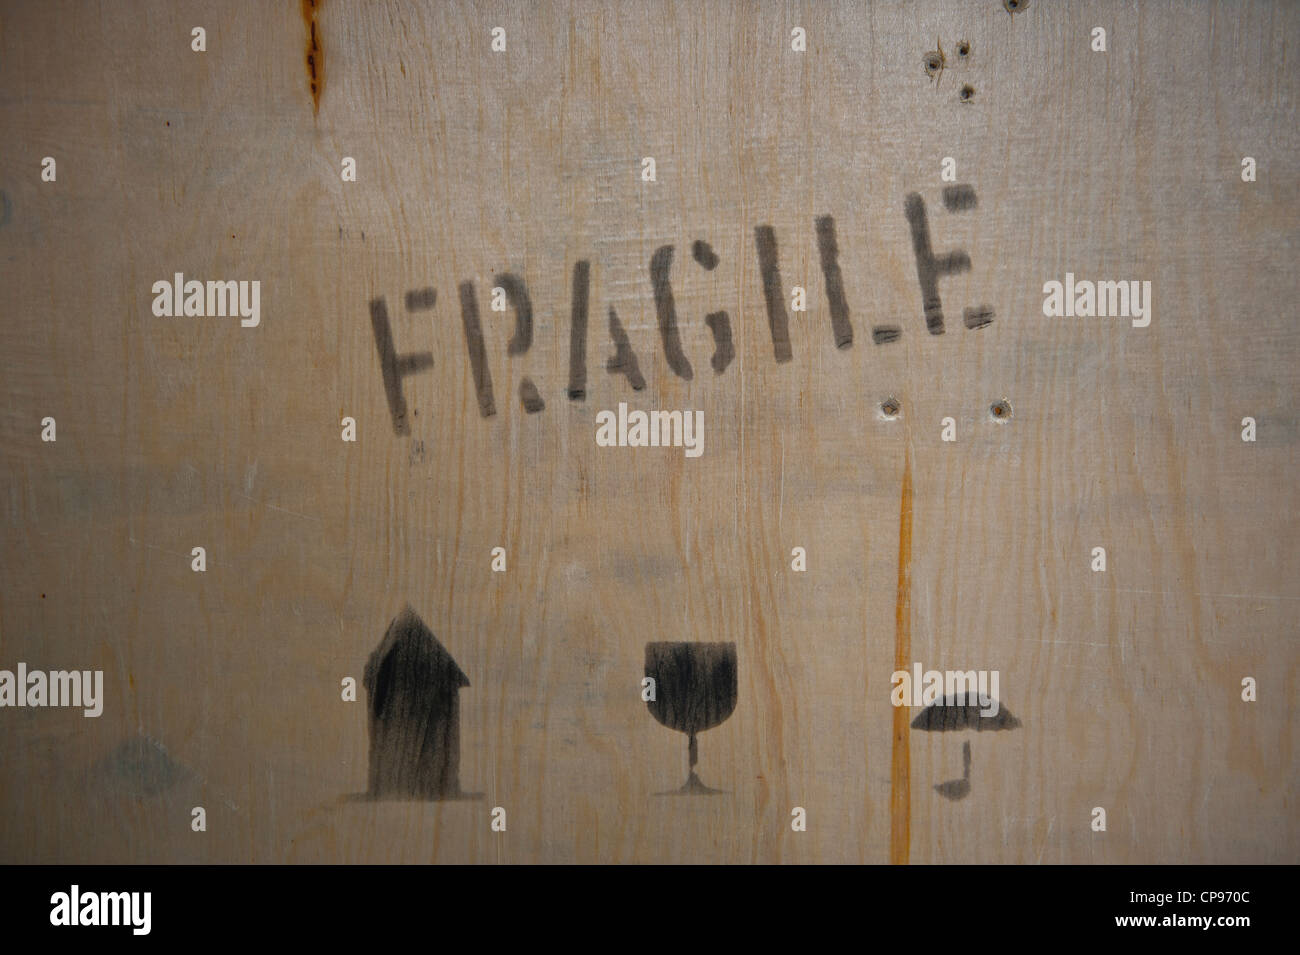 Fragile wooden packaging box crate Stock Photo